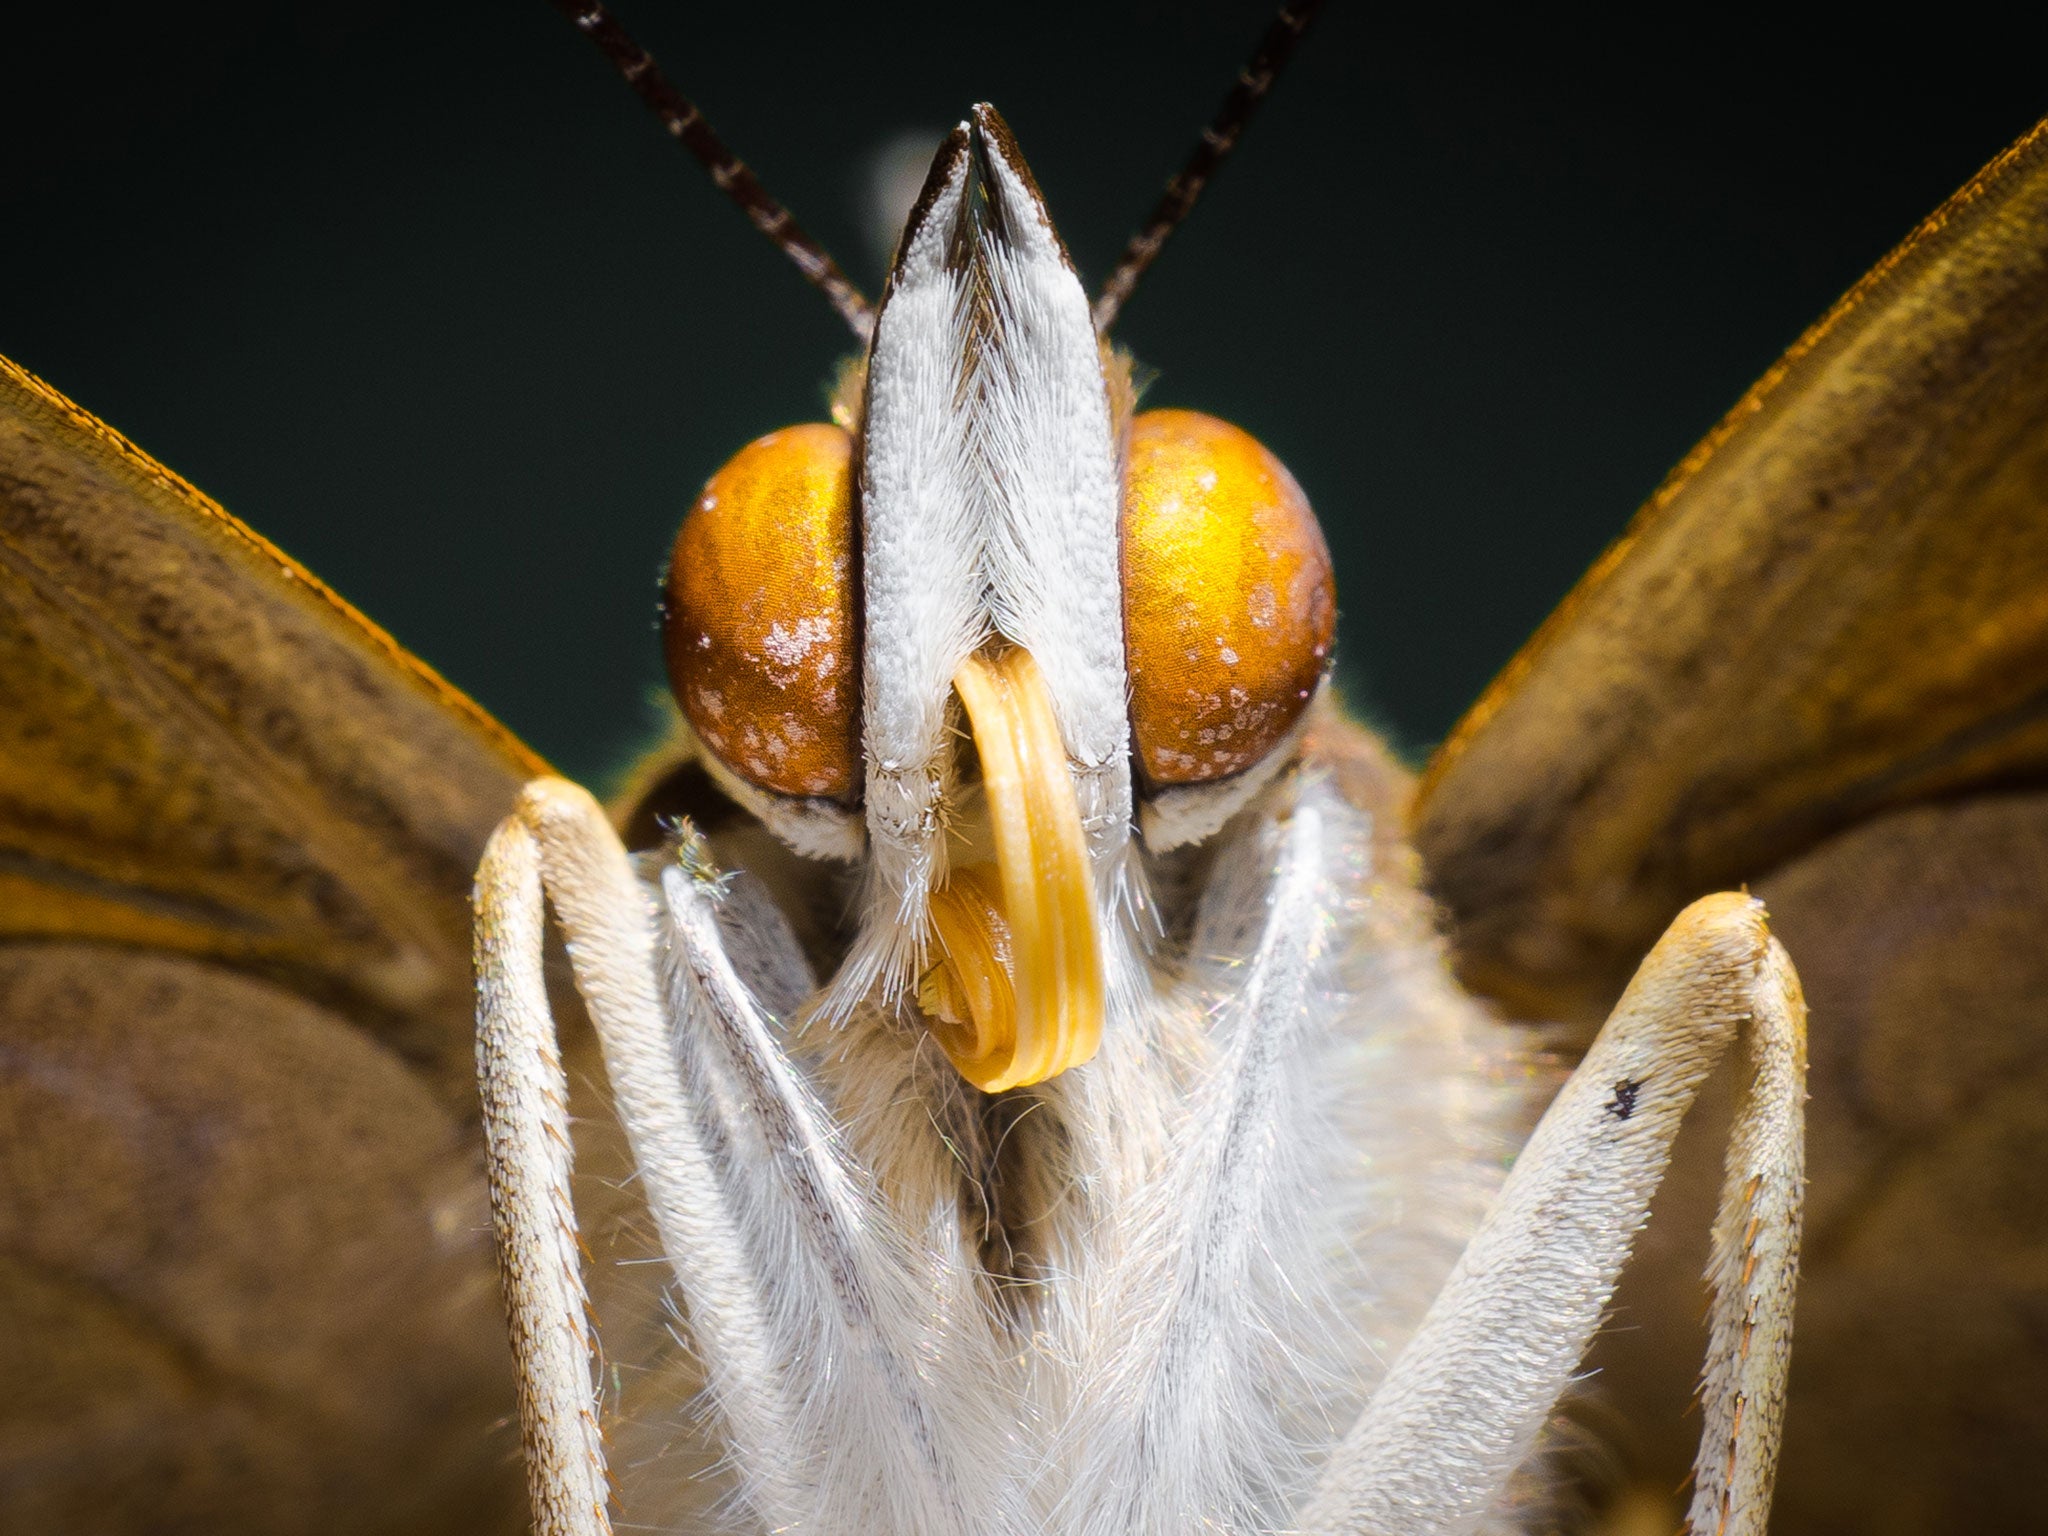 A Purple Emperor Butterfly's head is pictured up close at the Haslemere Museum in Surrey